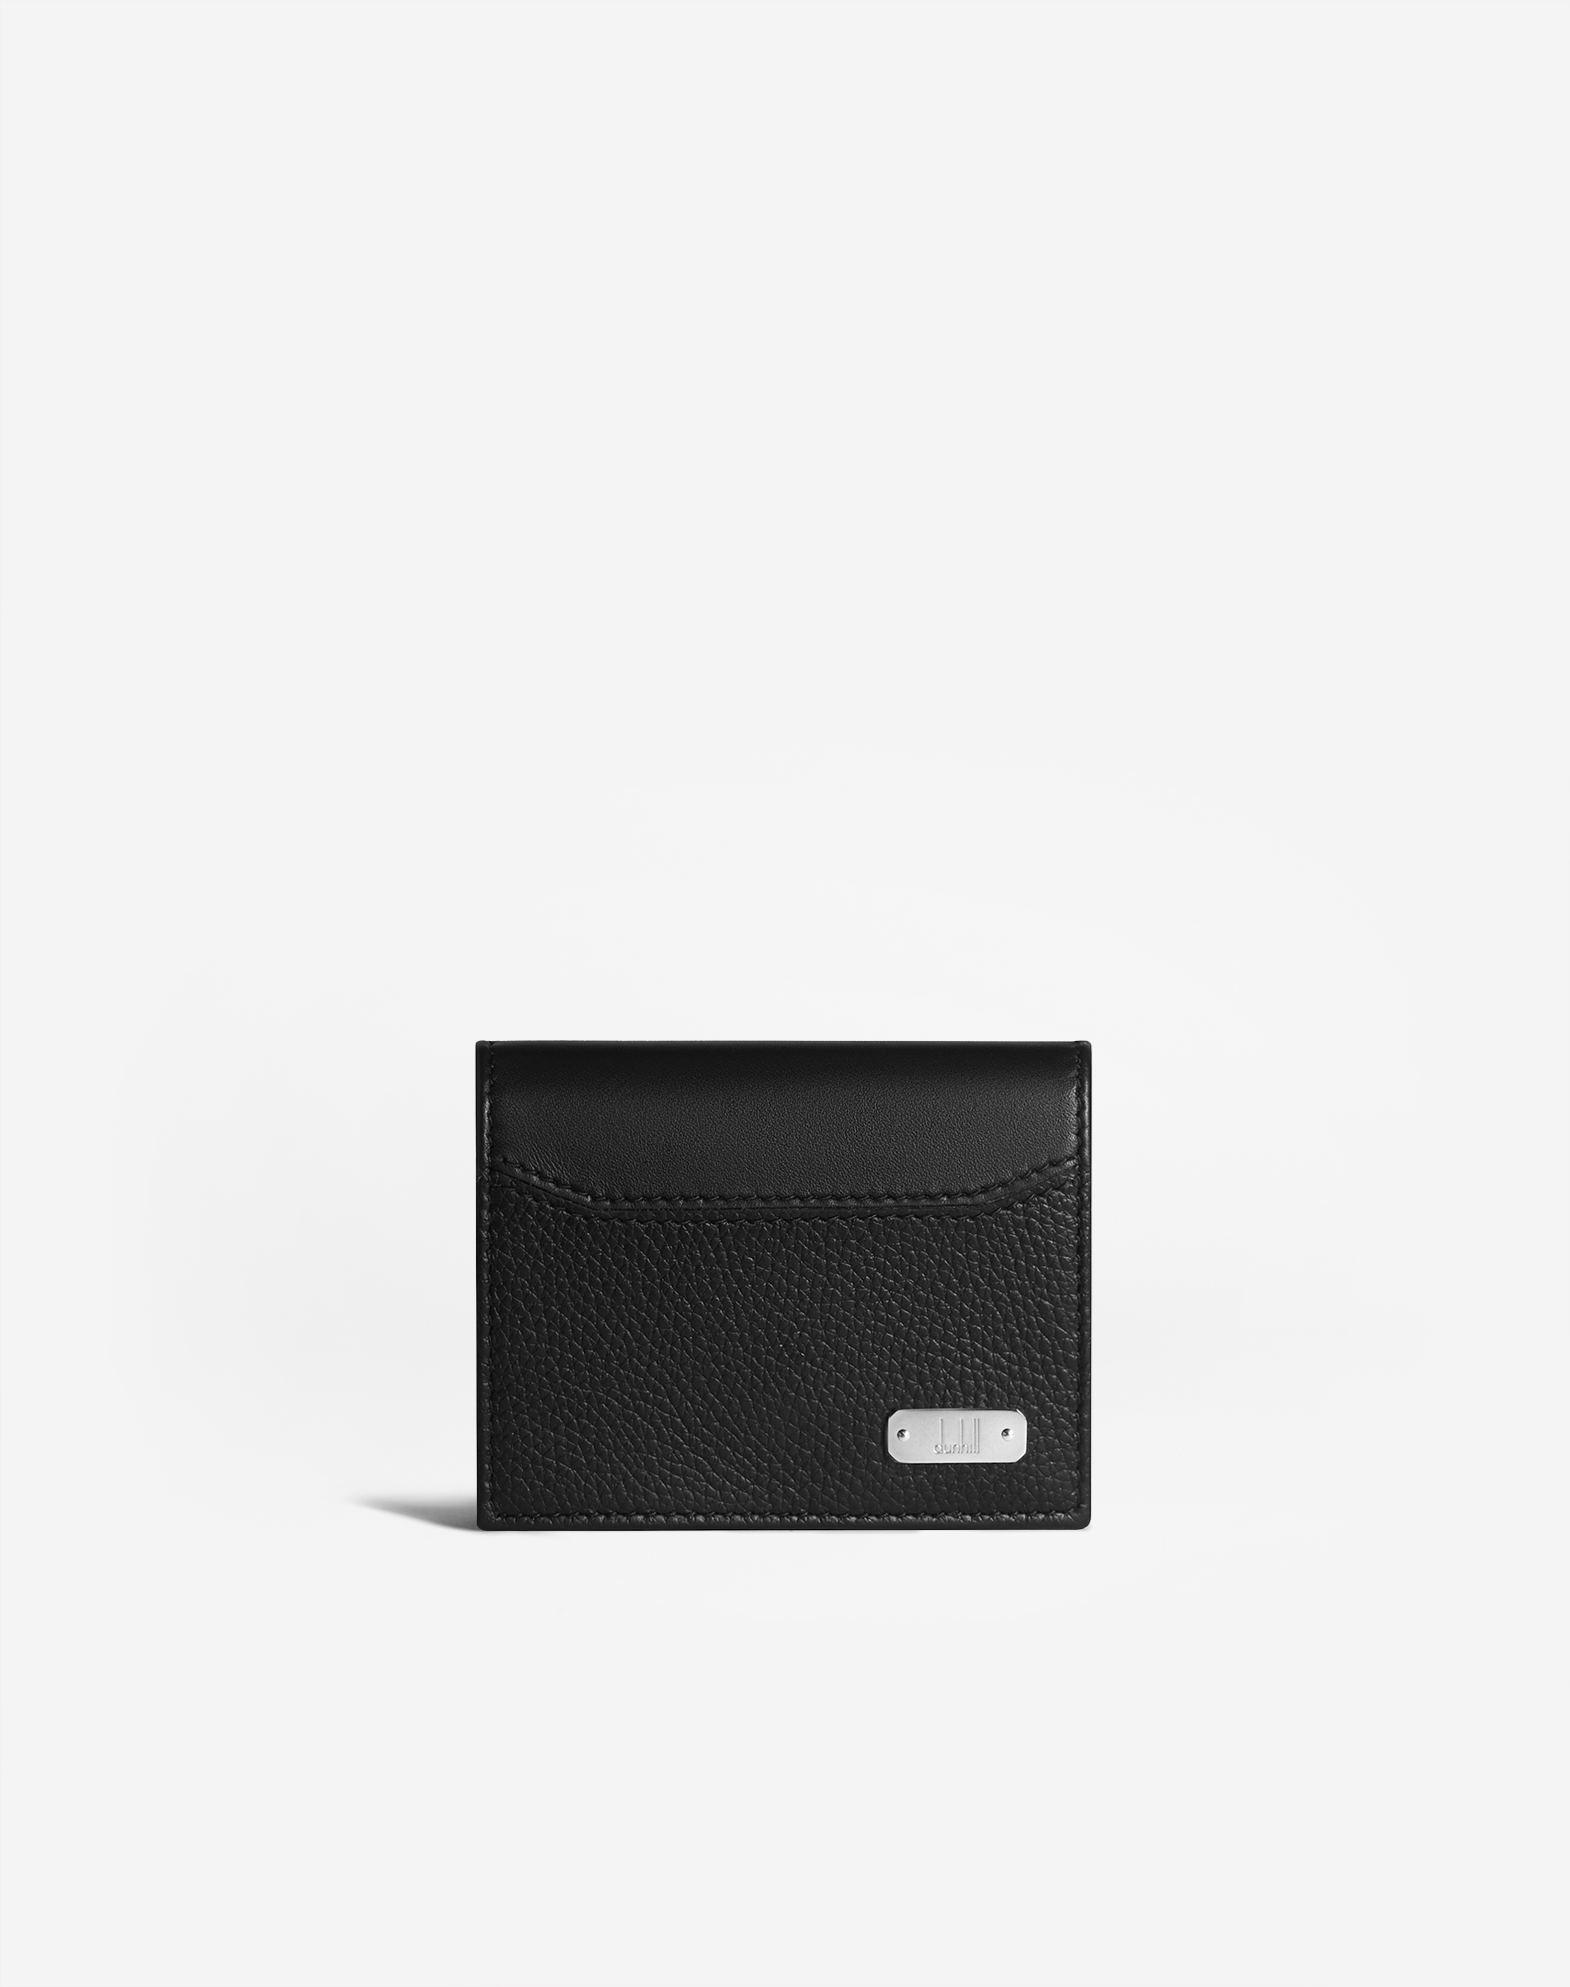 Dunhill 1893 Harness Coin Purse In Black